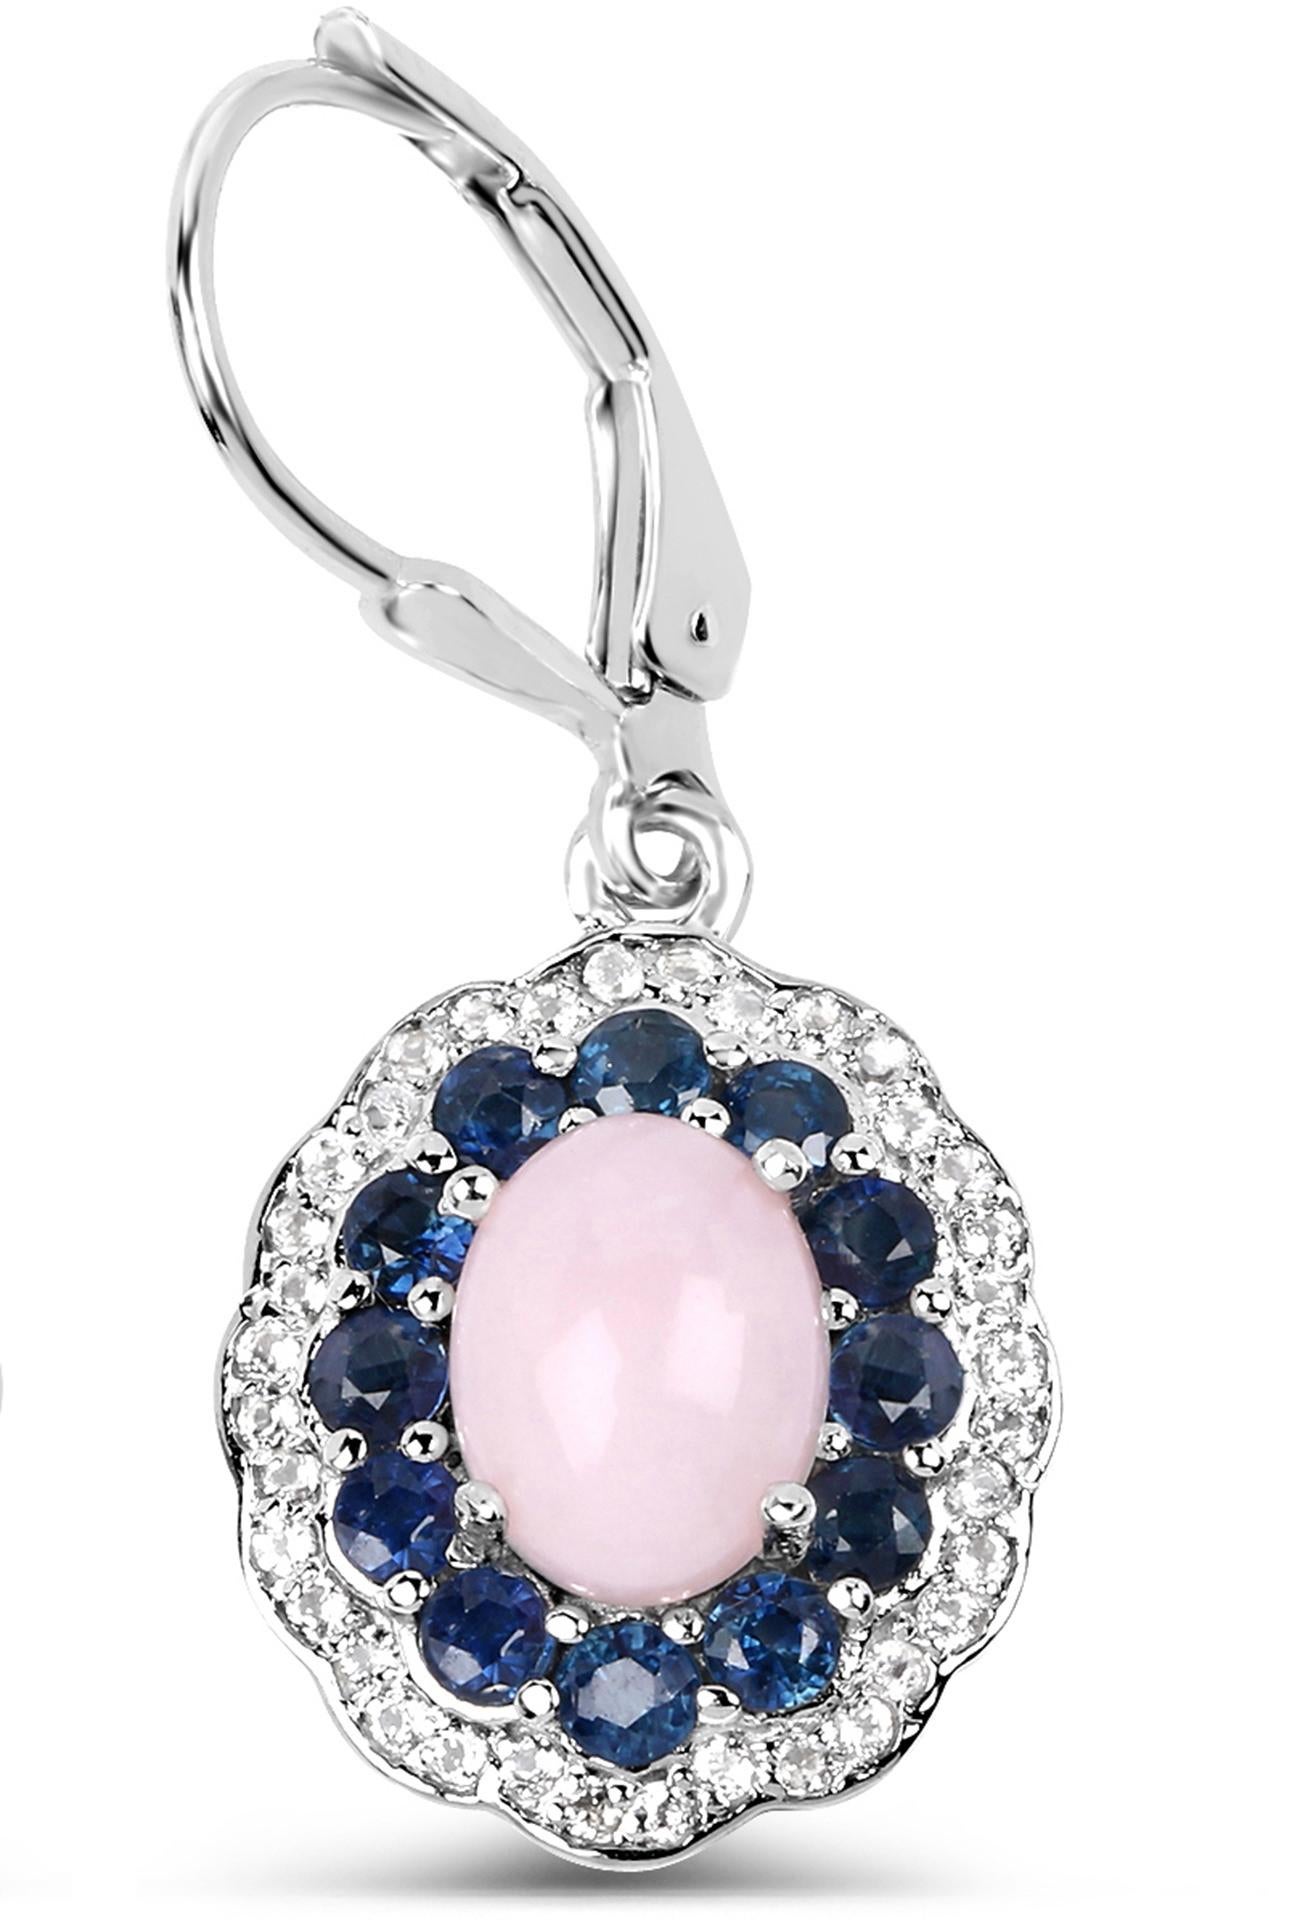 Natural Pink Opal & Blue Sapphire Dangle Earrings Rhodium Plated Silver In Excellent Condition For Sale In Laguna Niguel, CA